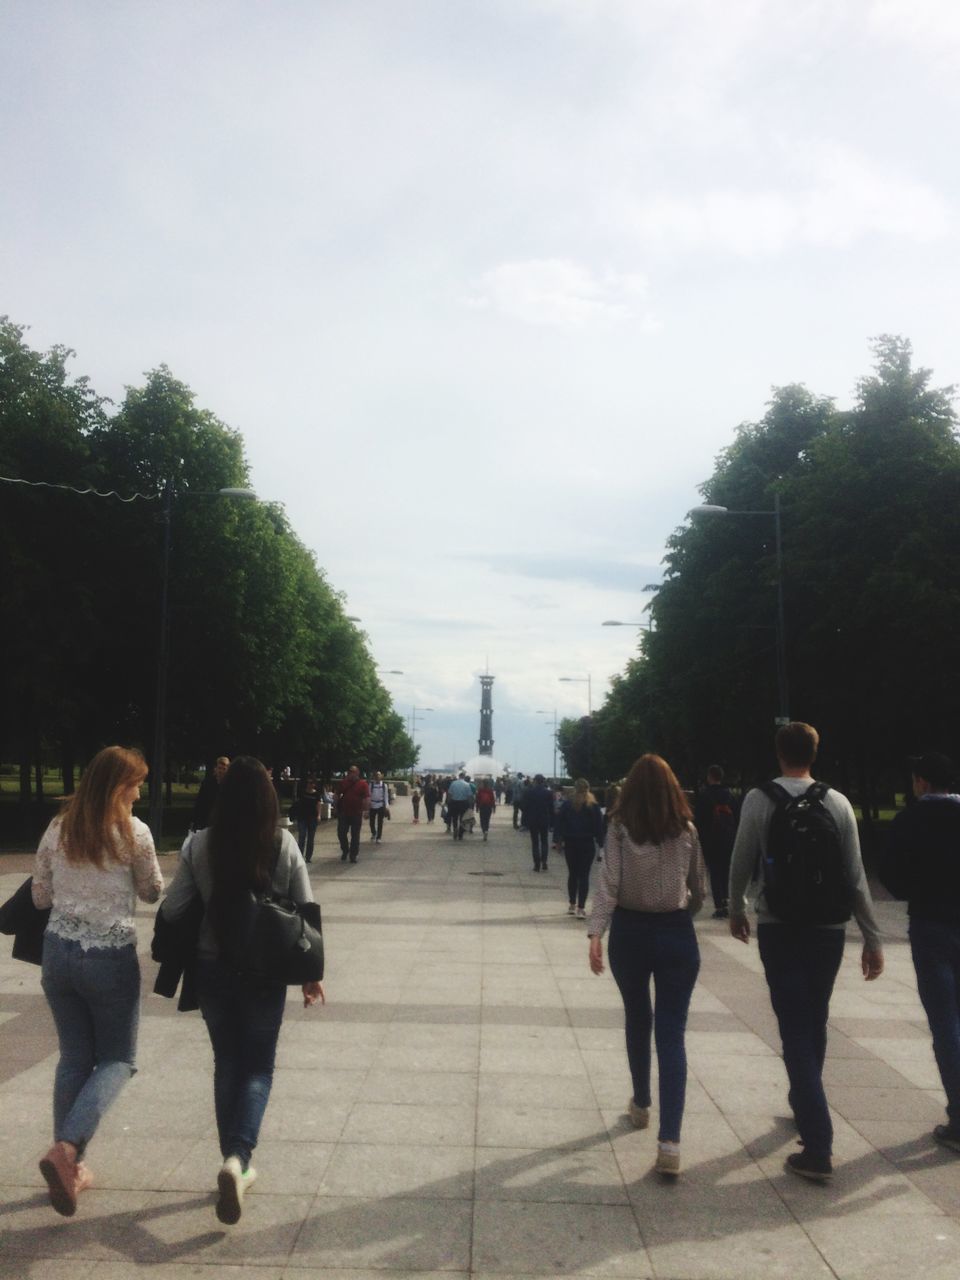 group of people, walking, tree, plant, real people, rear view, women, city, sky, lifestyles, direction, the way forward, adult, architecture, people, men, casual clothing, nature, full length, day, diminishing perspective, outdoors